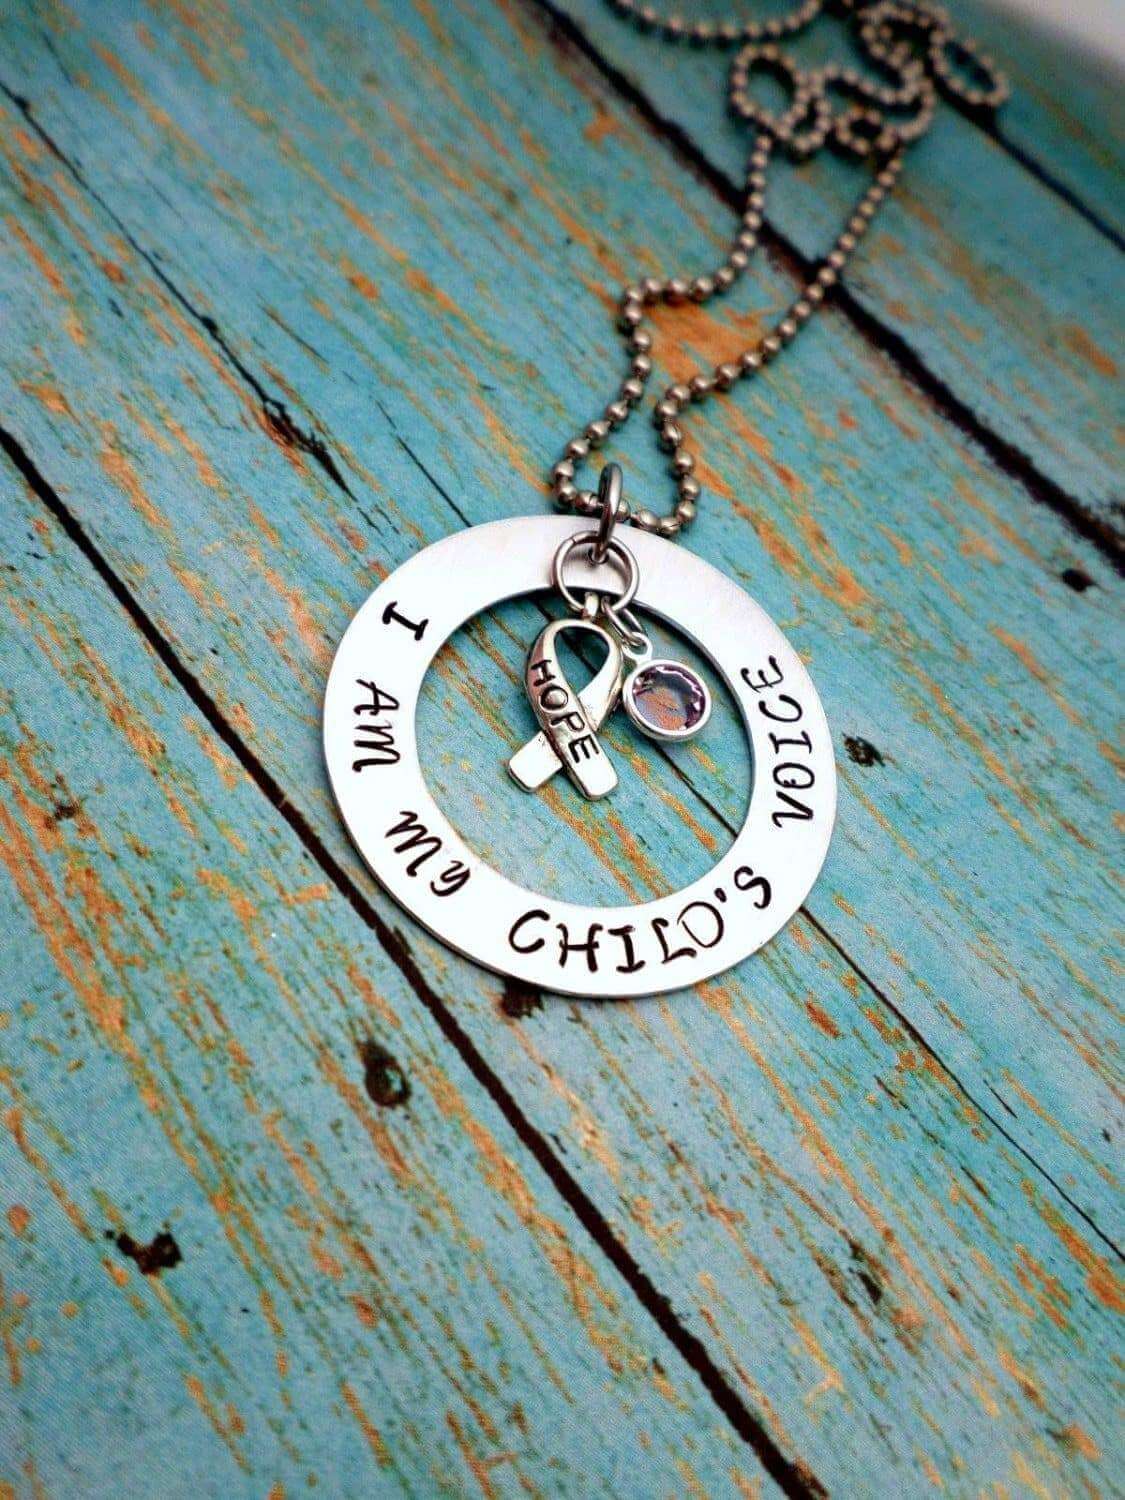 I am my child's voice, Rett Syndrome Awareness Necklace, Hope Ribbon Necklace, Rett Syndrome, Necklaces, HandmadeLoveStories, HandmadeLoveStories , [Handmade_Love_Stories], [Hand_Stamped_Jewelry], [Etsy_Stamped_Jewelry], [Etsy_Jewelry]